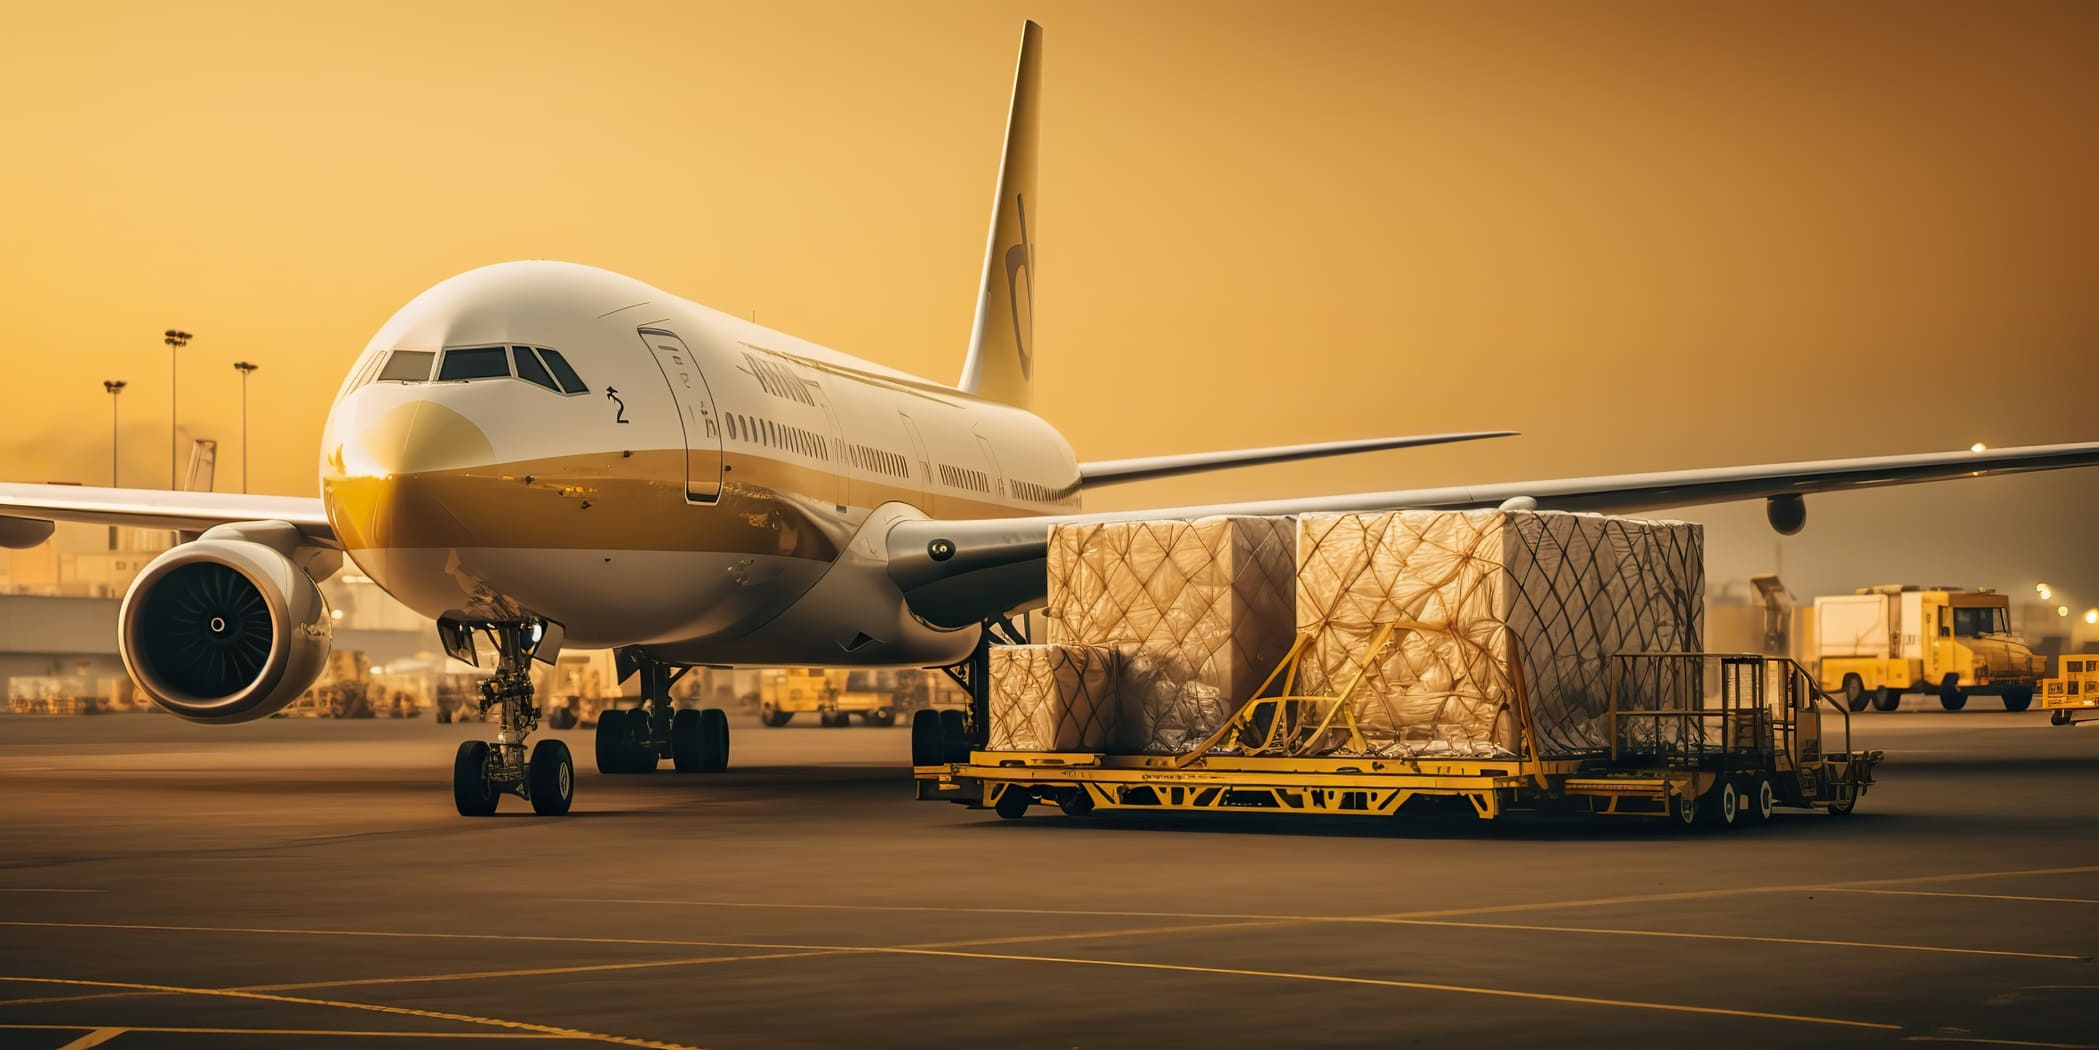 Air Freight Company